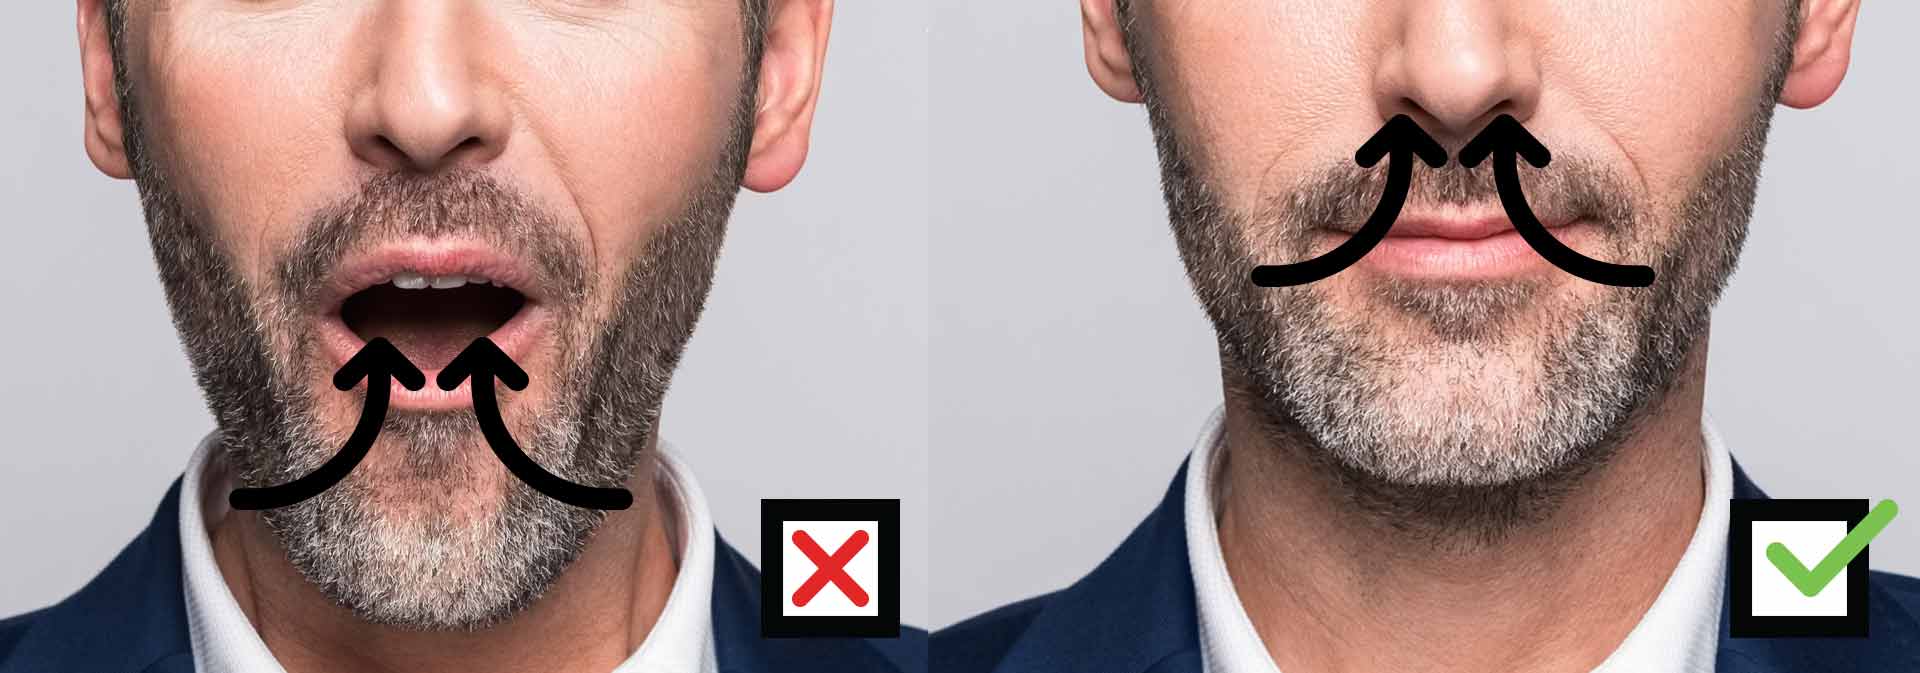 Middle Aged Man Incorrectly Breathing Through Mouth Compared to Man Breathing Correctly Through his Nose-1920x673